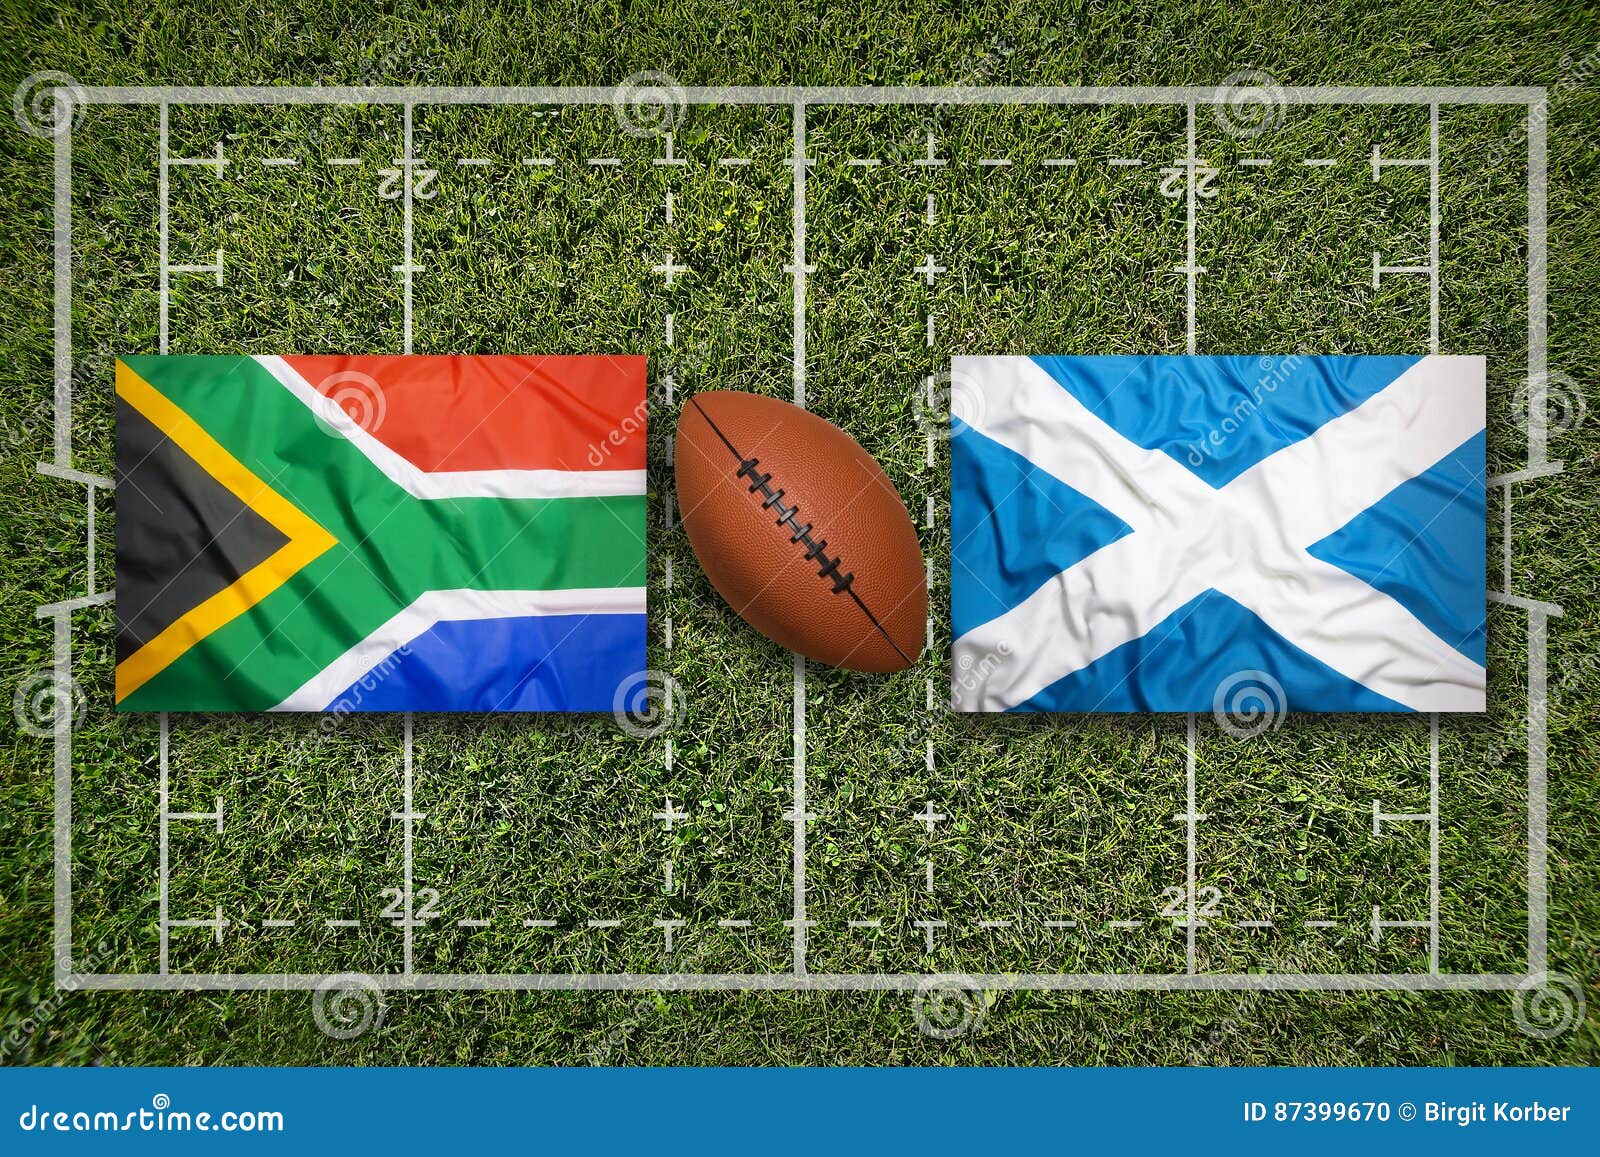 South Africa Vs. Scotland Flags on Rugby Field Stock Photo Image of